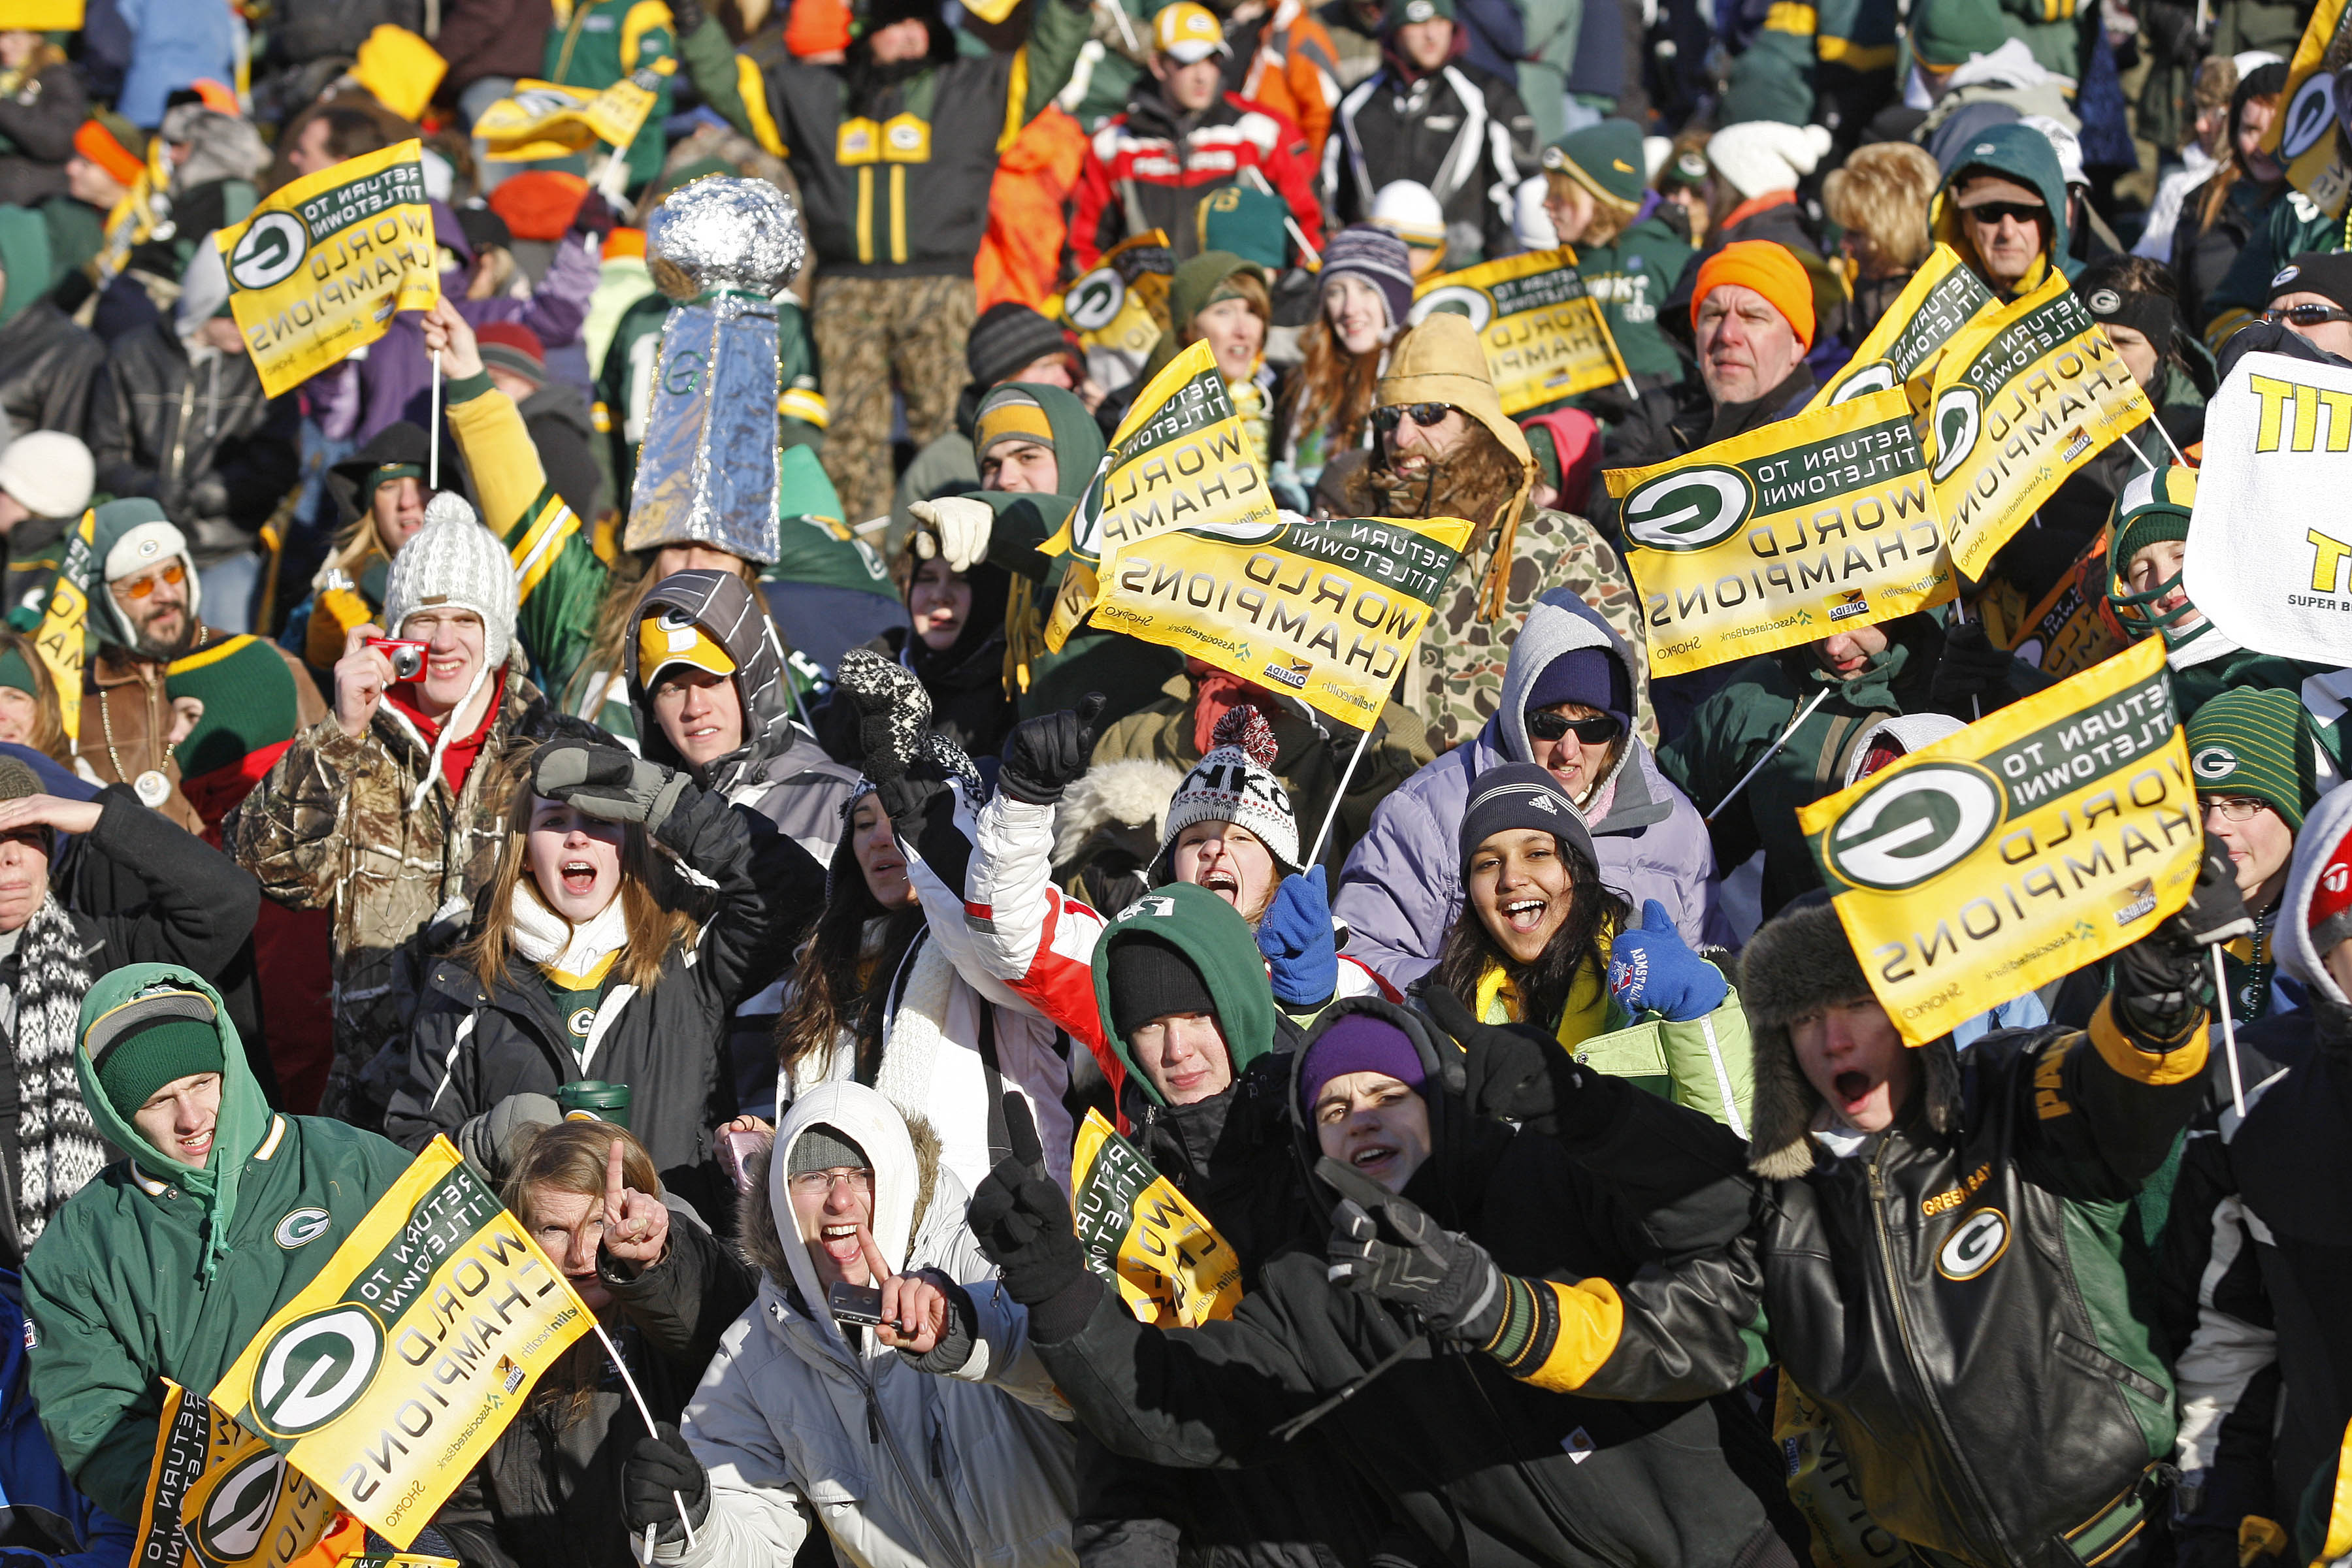 GREEN BAY, WI - FEBRUARY 08: Green Bay Packers fans gather at Lambeau Field for the Packers victory ceremony on February 8, 2011 in Green Bay, Wisconsin.  (Photo by Matt Ludtke/Getty Images)